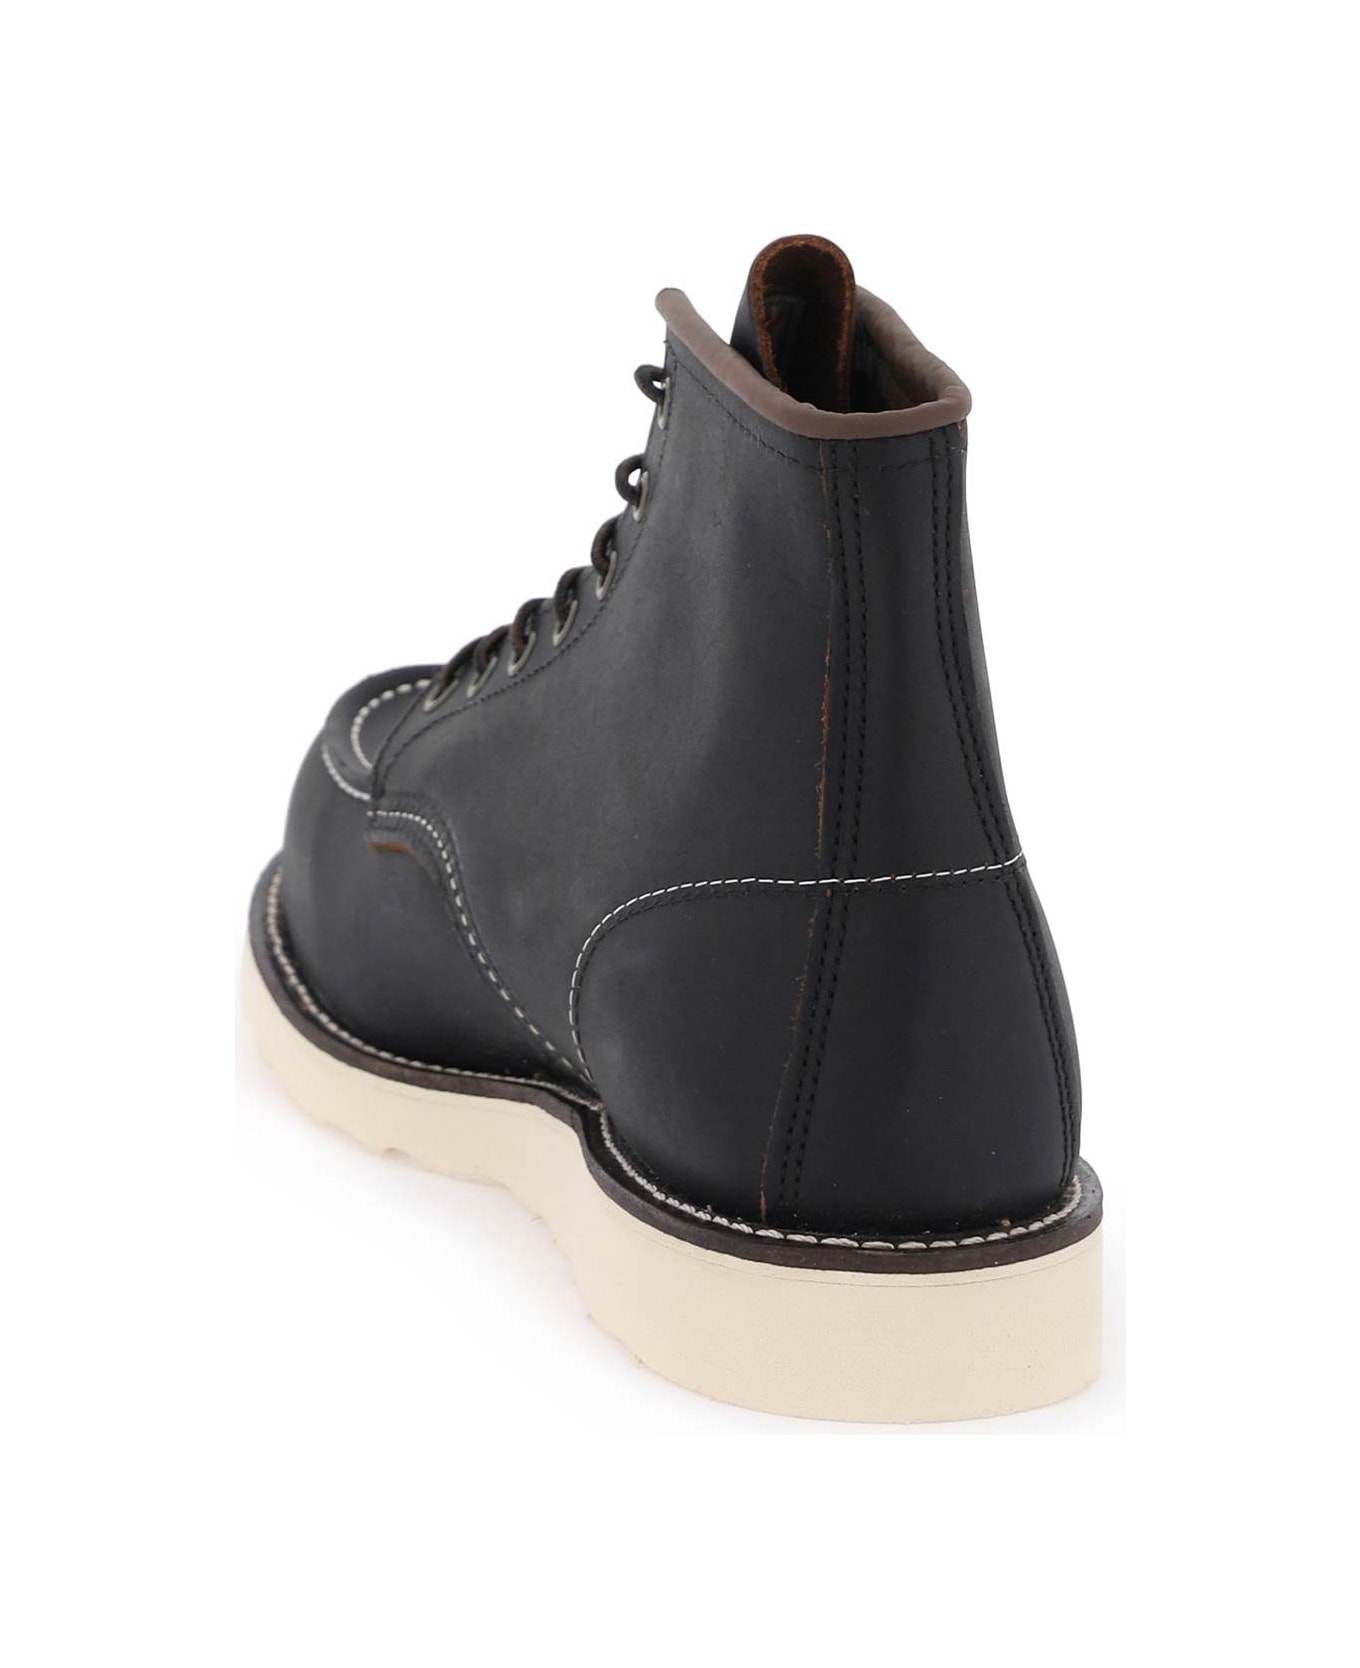 Red Wing Classic Moc Ankle Boots - BLACK (Black)